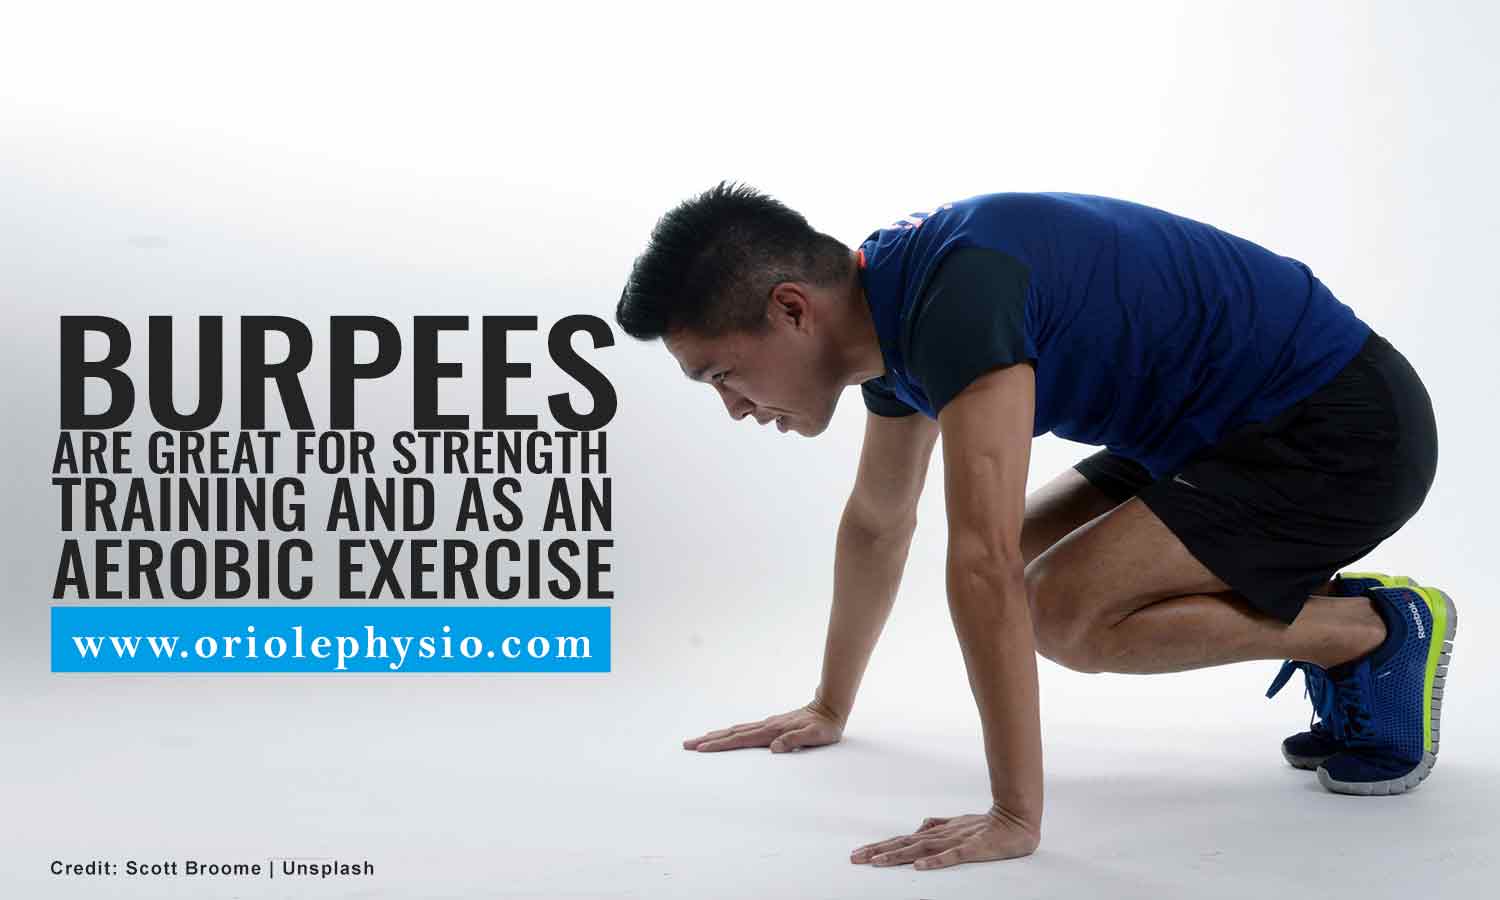 Burpees are great for strength training and as an aerobic exercise.